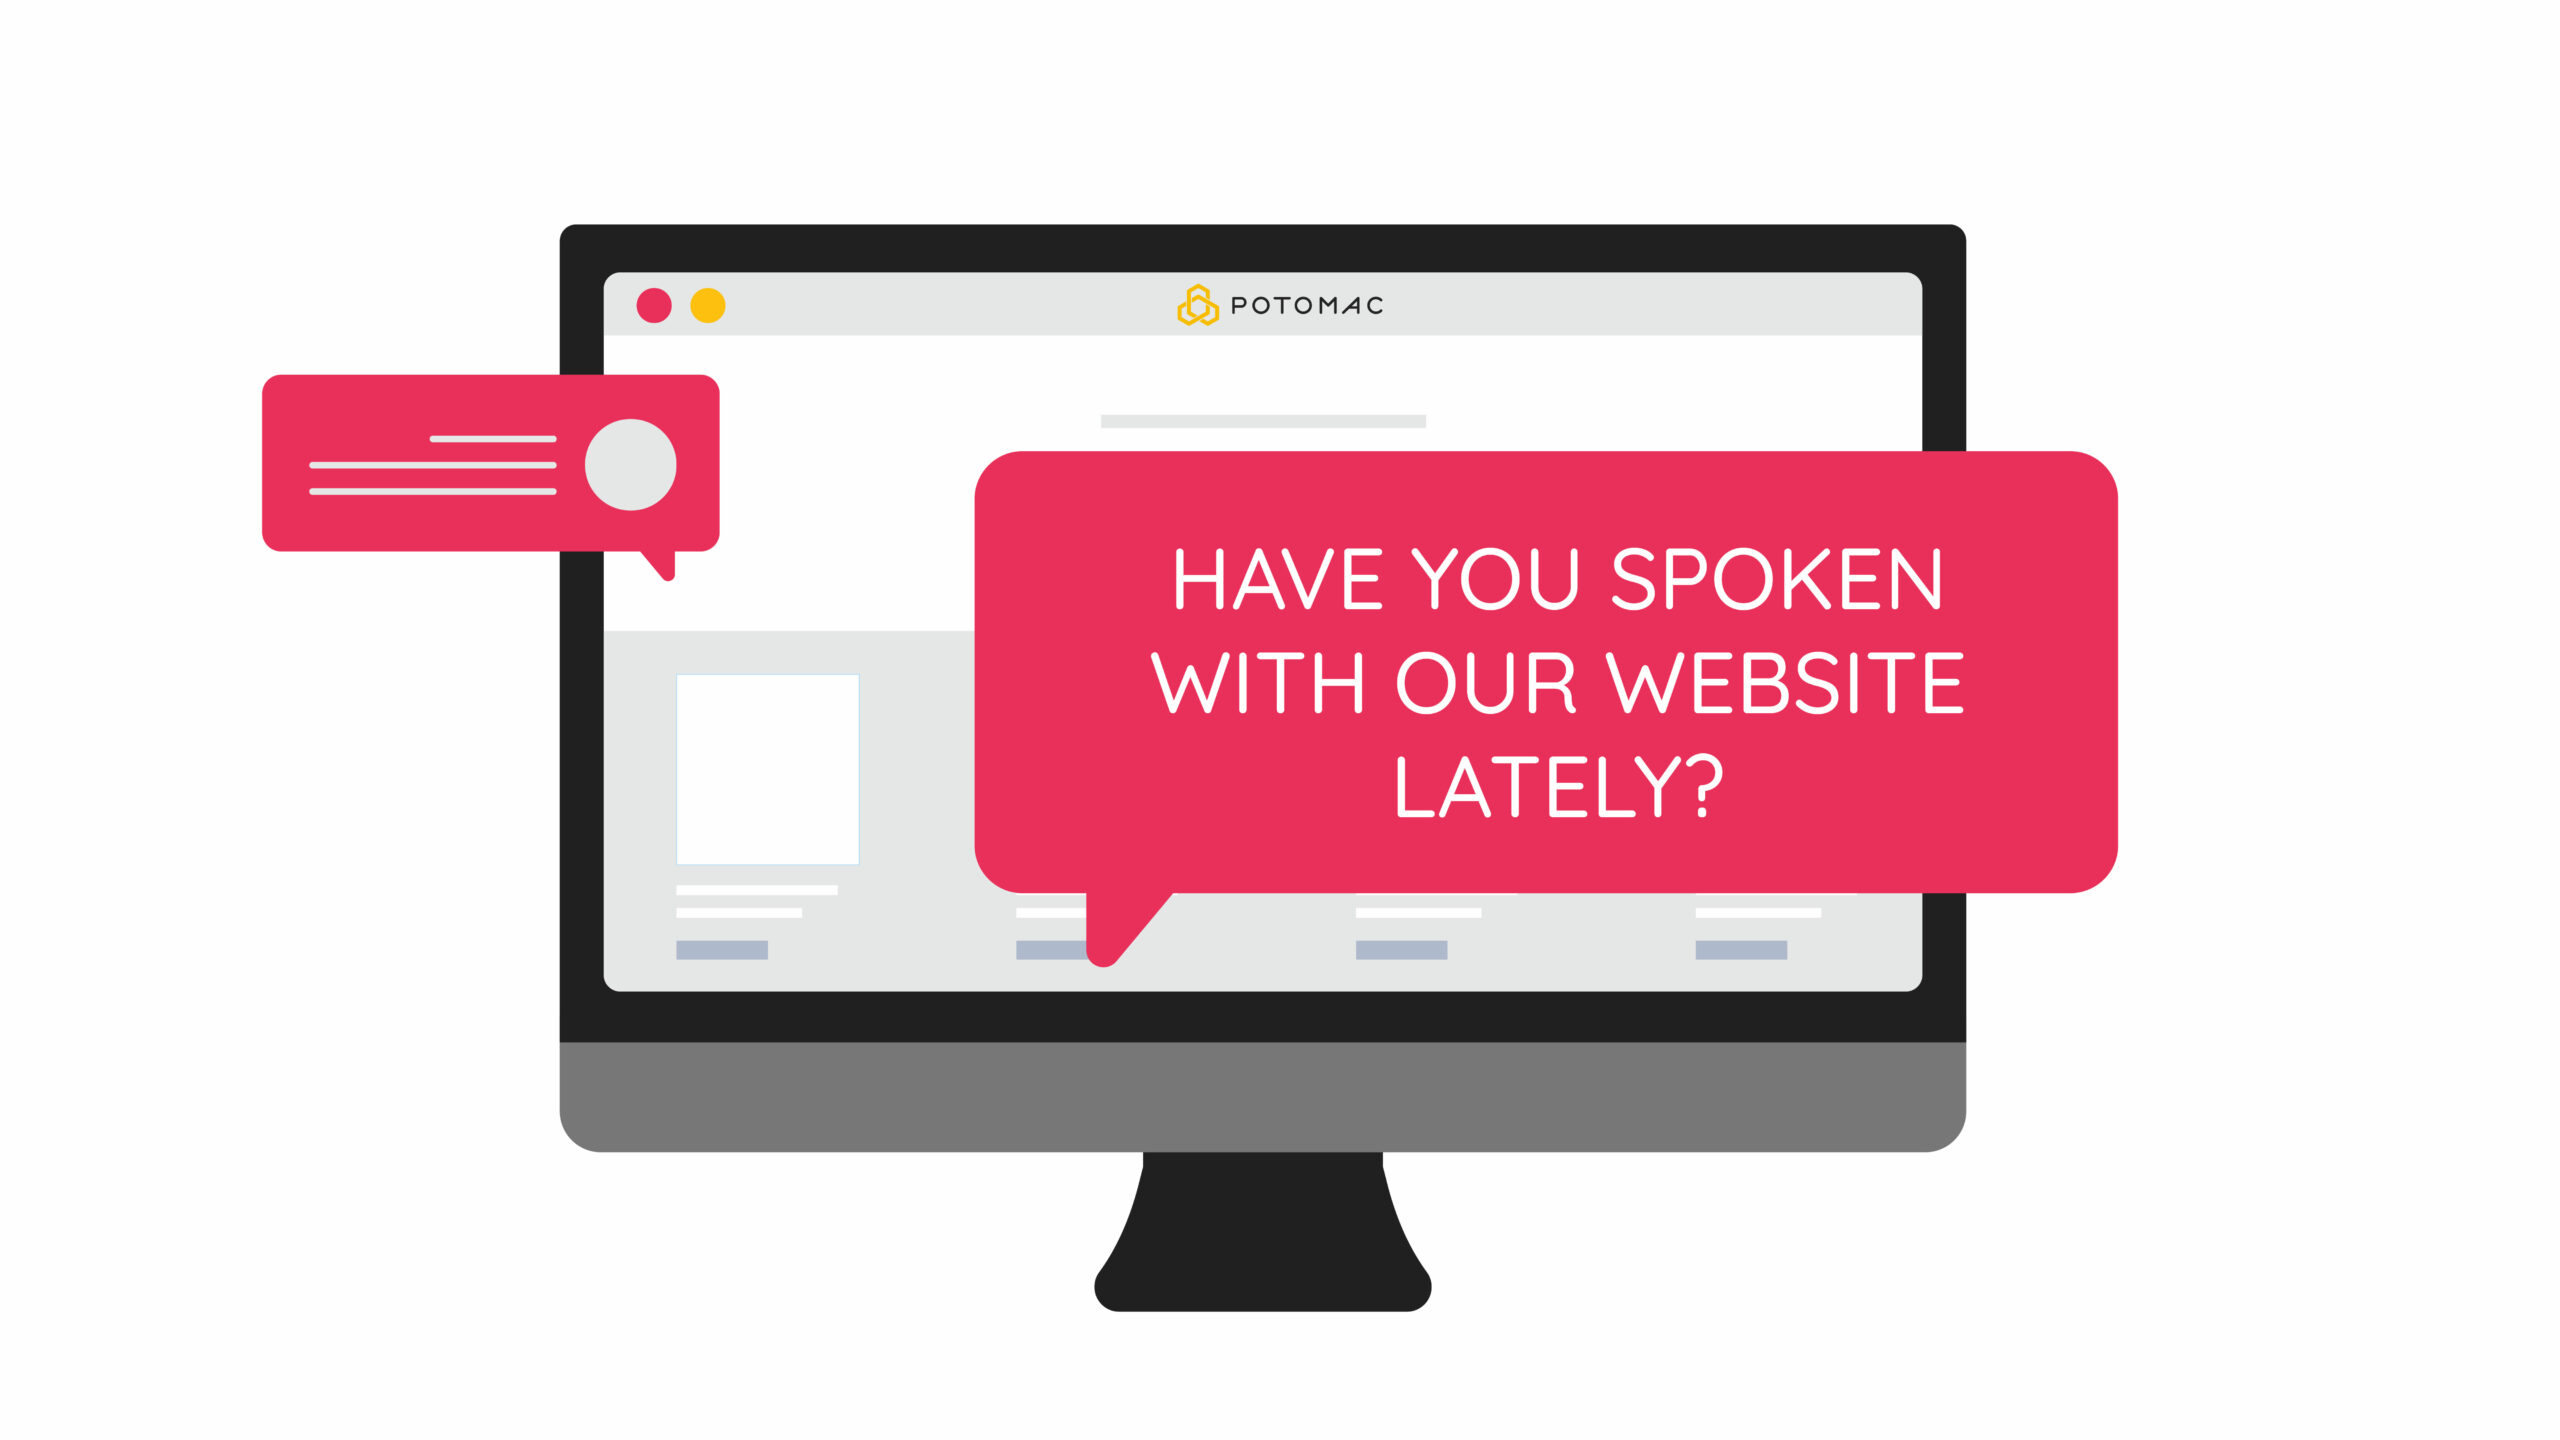 Have You Spoken With Our Website Lately?